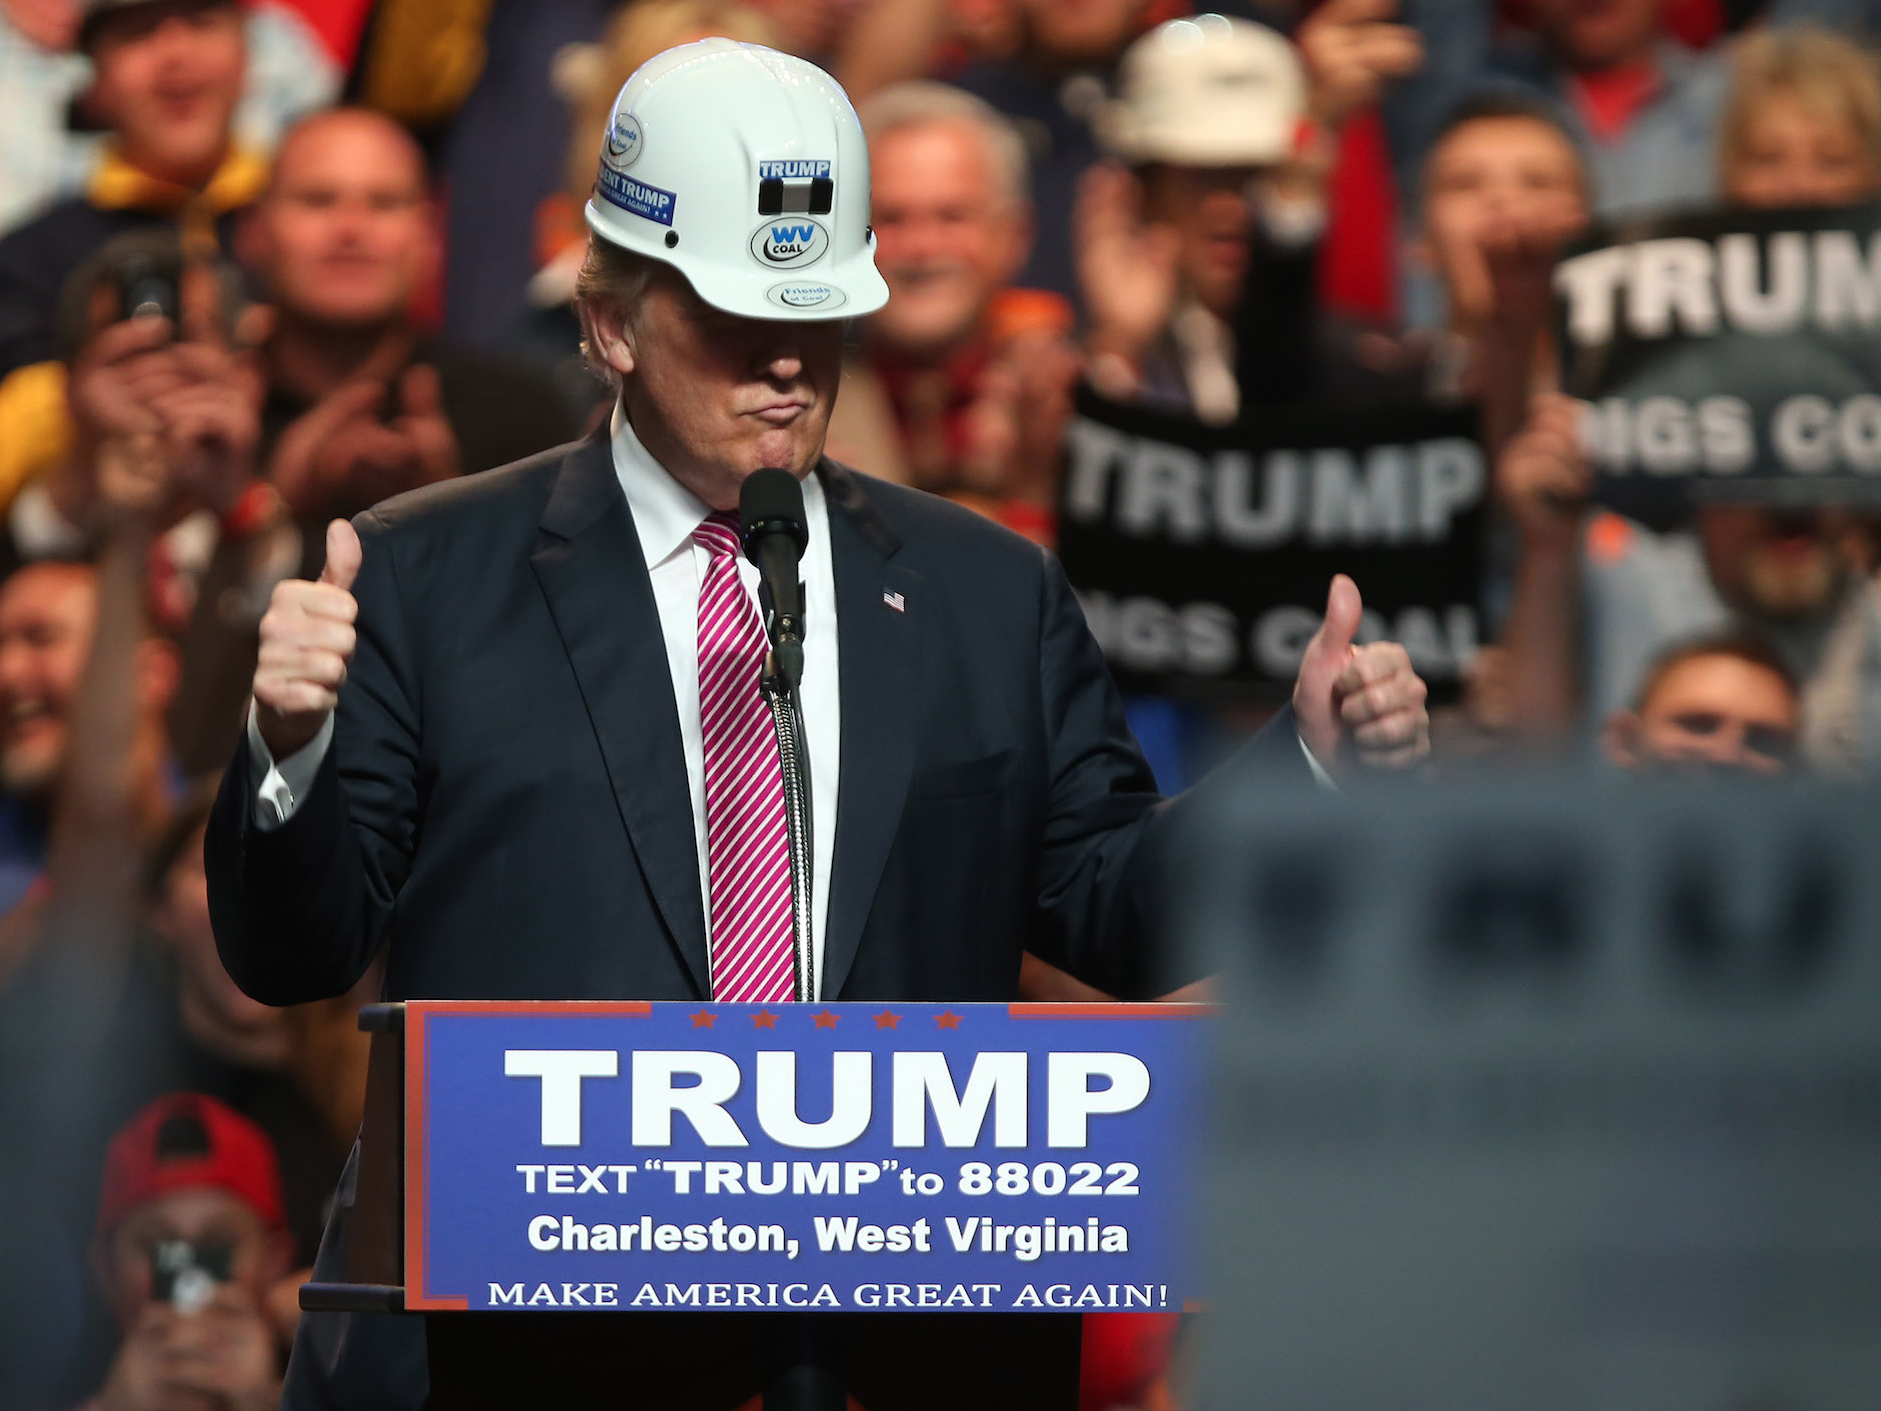 Trump campaign unveils plan to spend $1 trillion on roads, bridges, and other infrastructure with no tax hikes